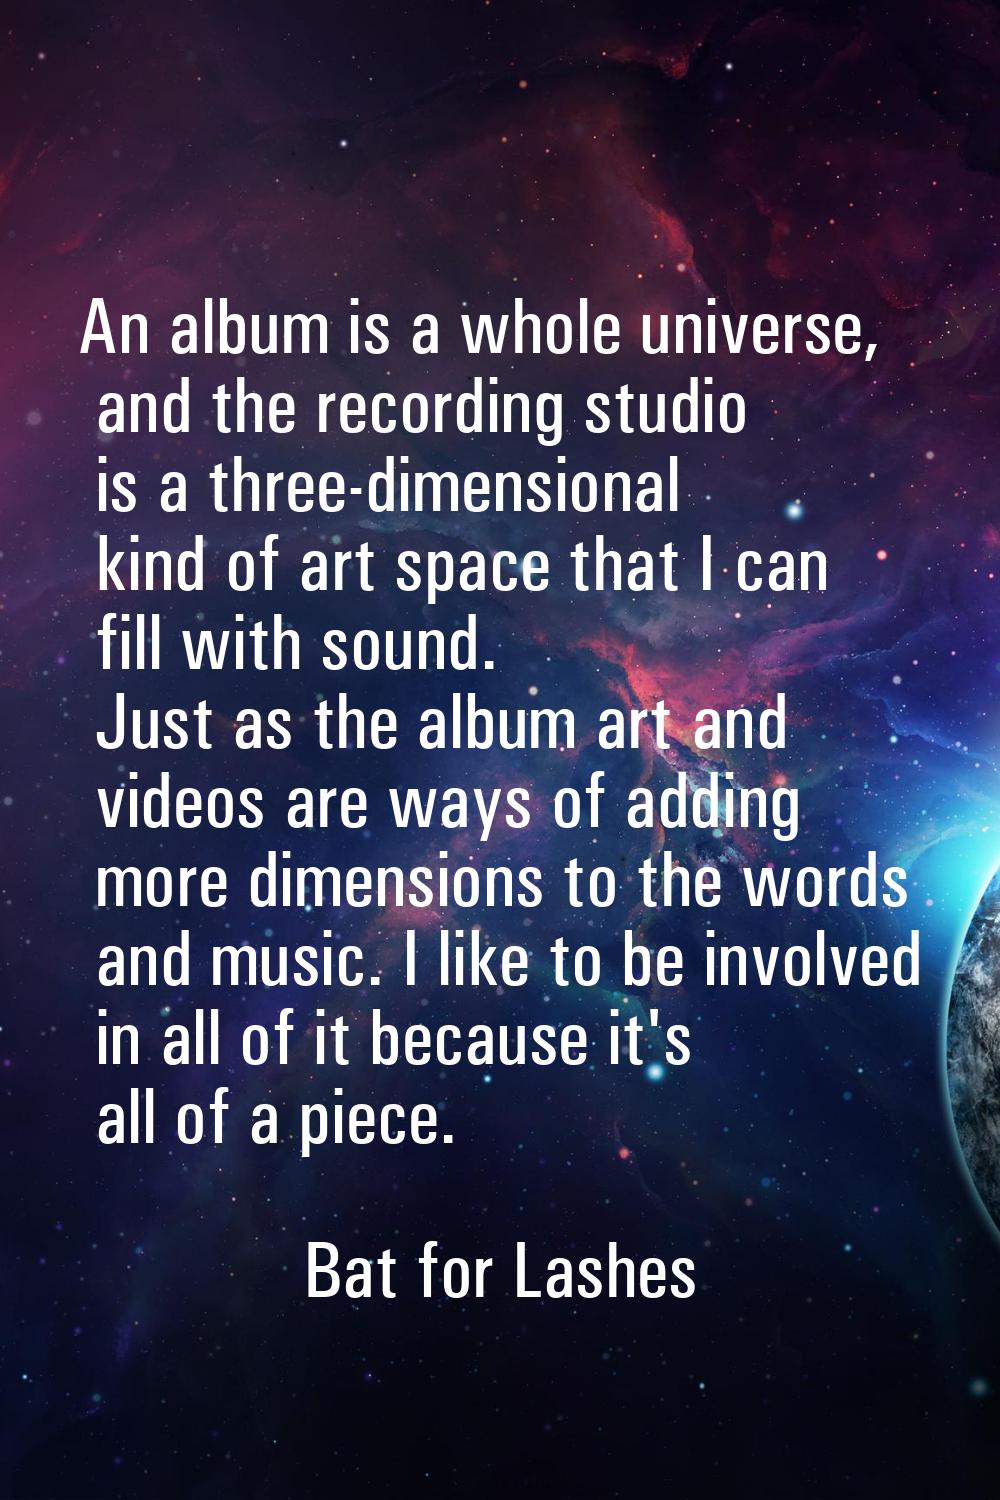 An album is a whole universe, and the recording studio is a three-dimensional kind of art space tha